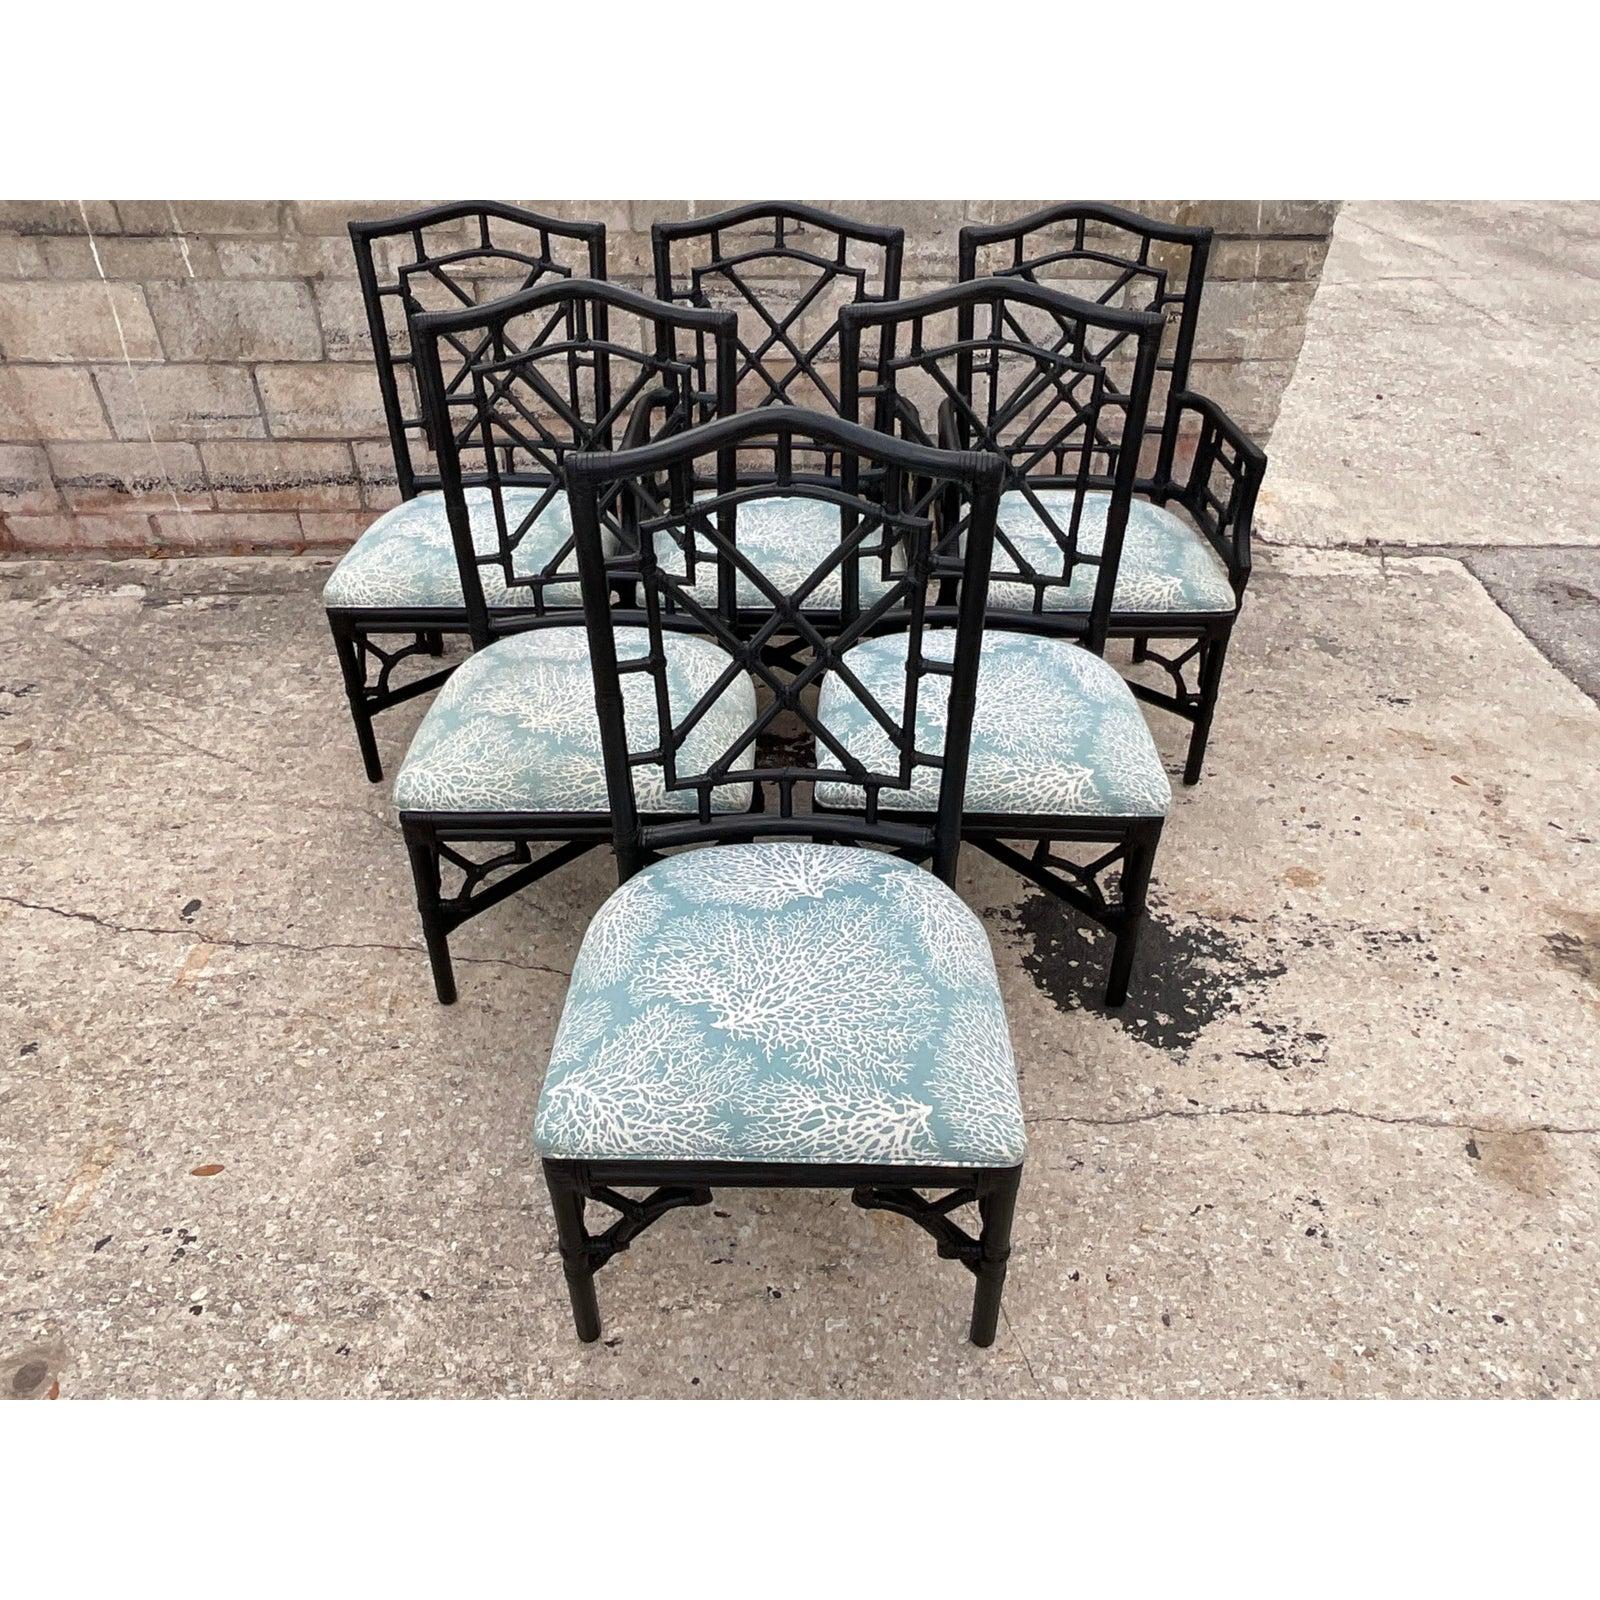 Philippine Vintage Coastal Rattan Chinese Chippendale Fretwork Dining Chairs, Set of 6